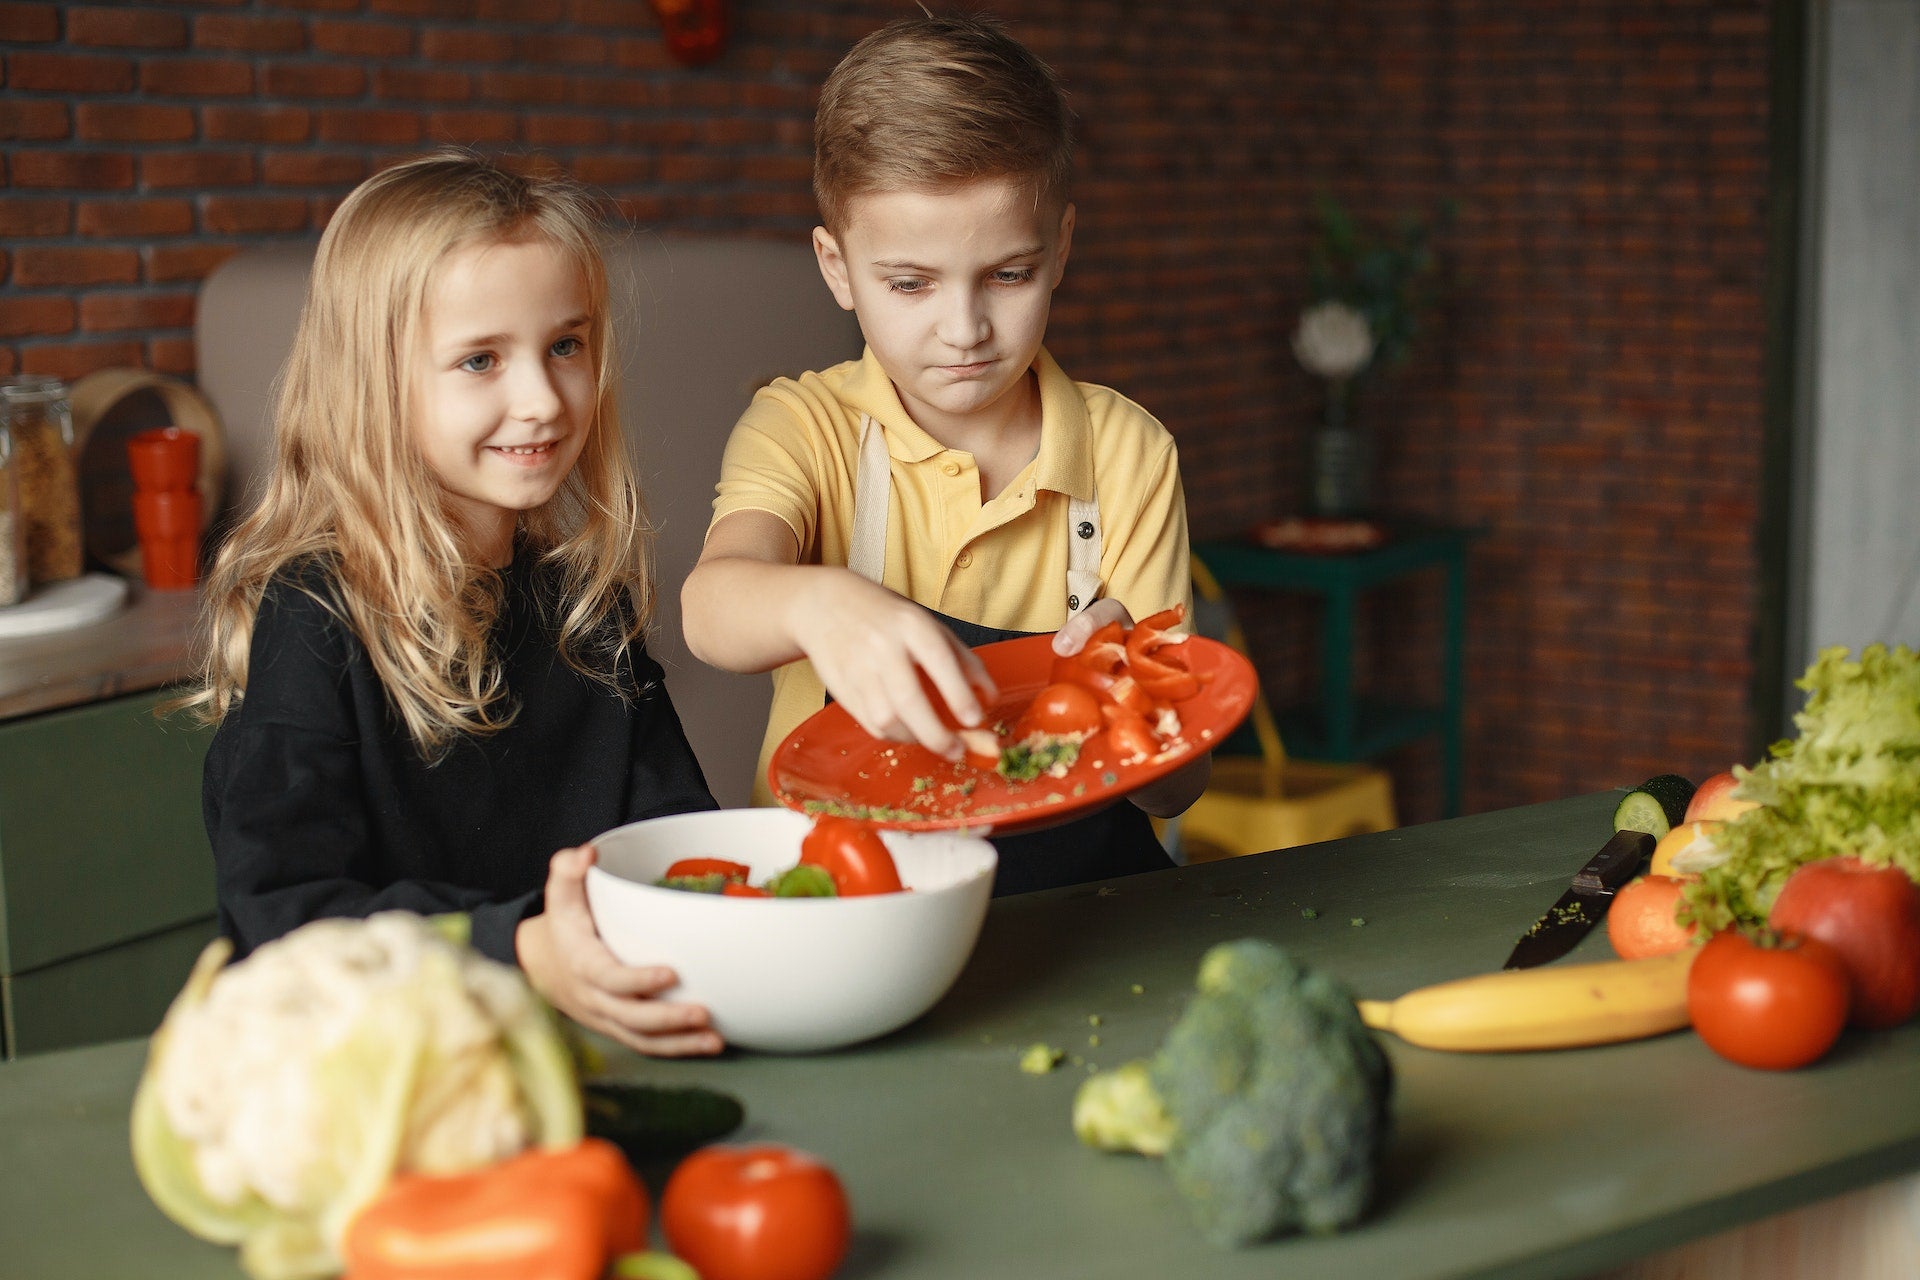 Kids at home: 3 tasty recipes to make together with local fruits and vegetables